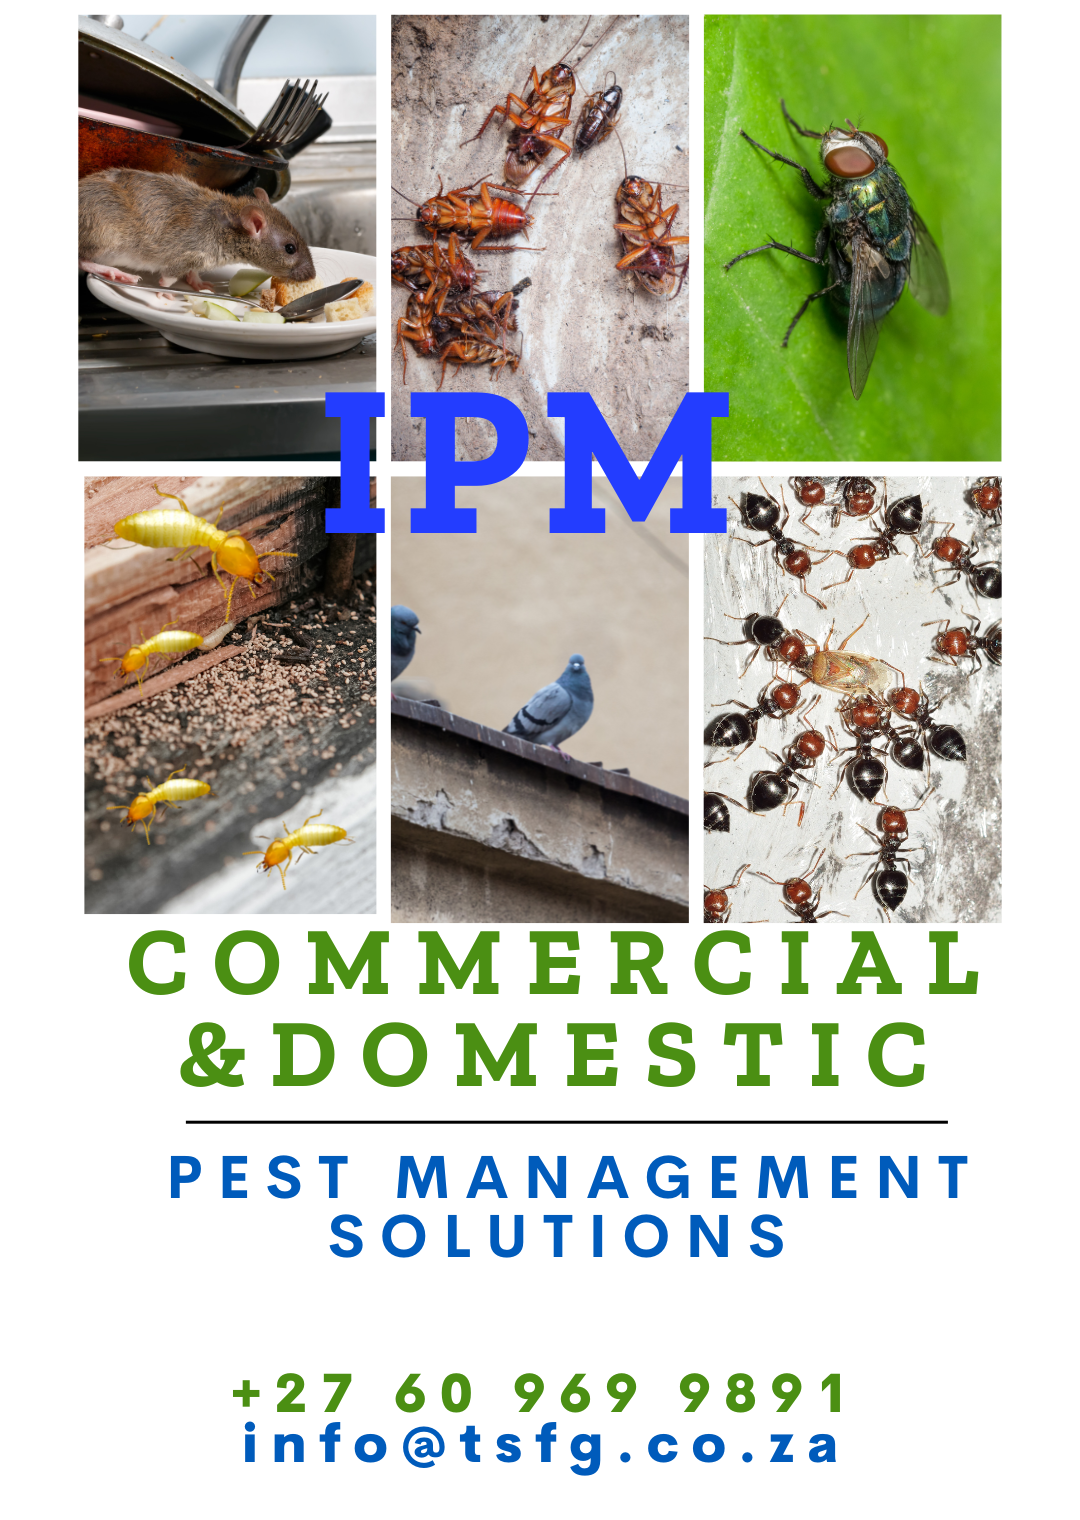 Integrated pest management solution or services  (1080 × 1520 px) (1)